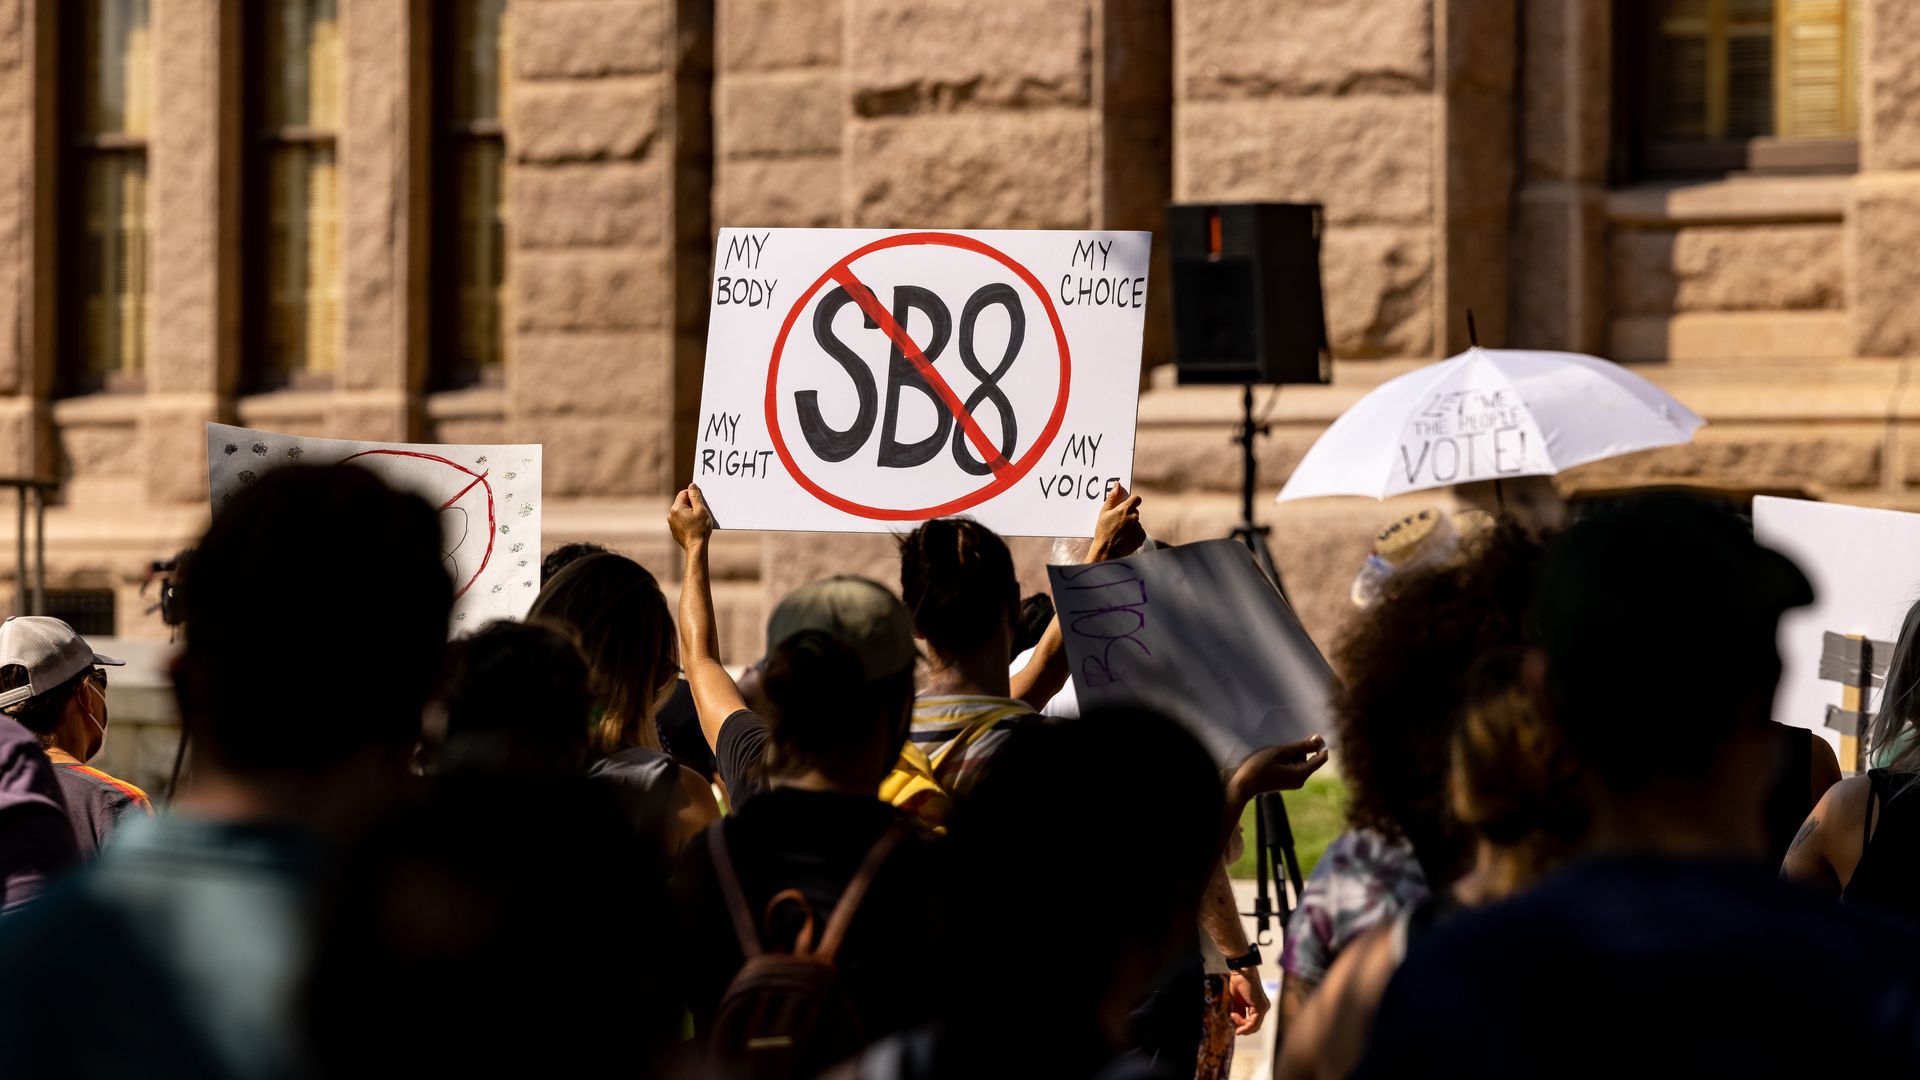 Photo of someone holding a sign that says "SB8" with a red X drawn over it